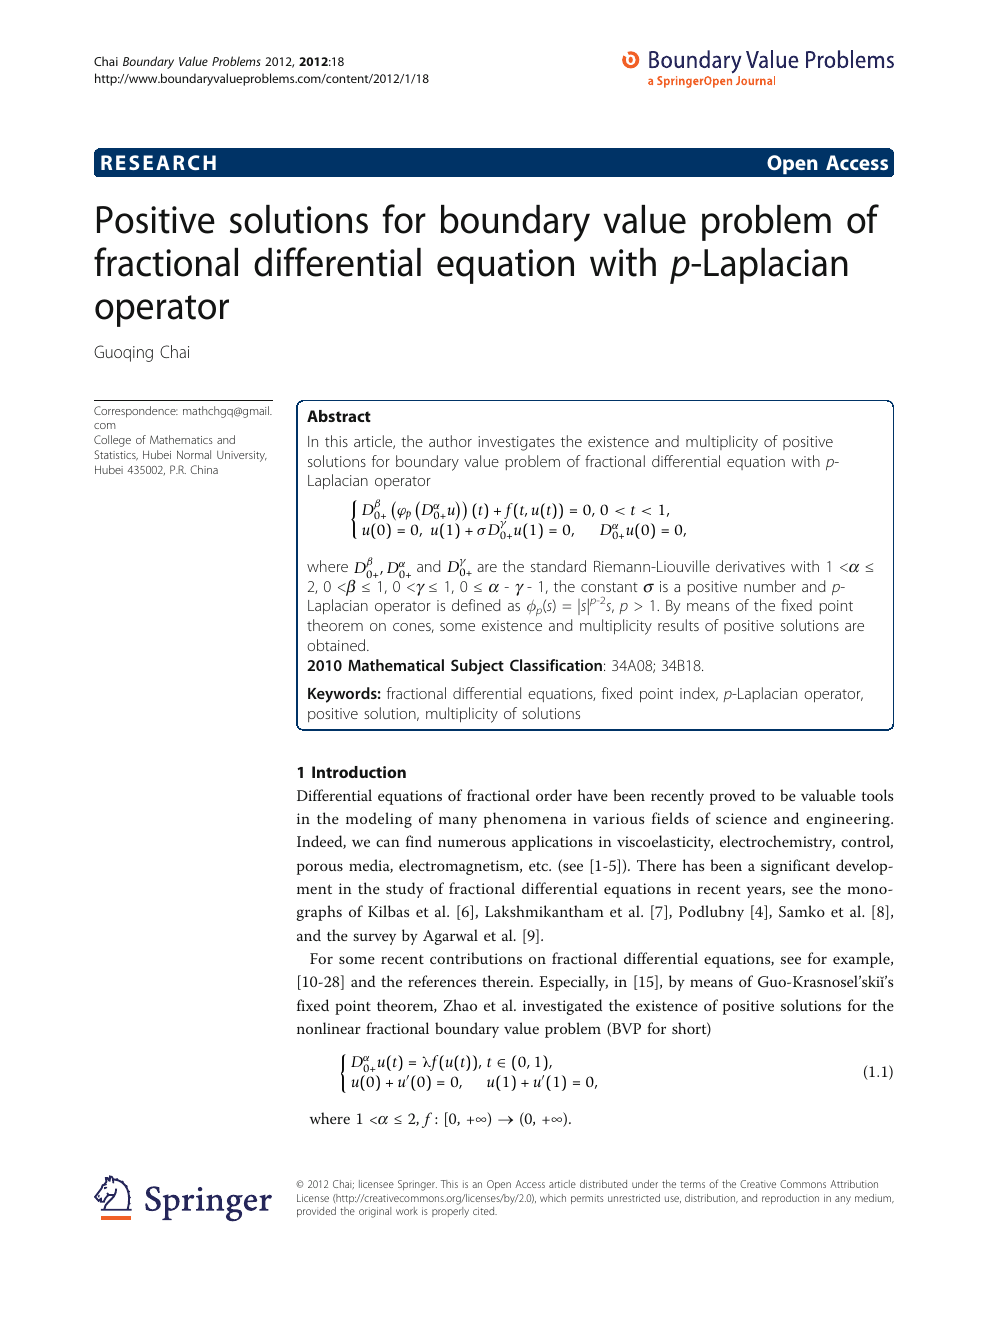 Positive Solutions For Boundary Value Problem Of Fractional Differential Equation With P Laplacian Operator Topic Of Research Paper In Mathematics Download Scholarly Article Pdf And Read For Free On Cyberleninka Open Science